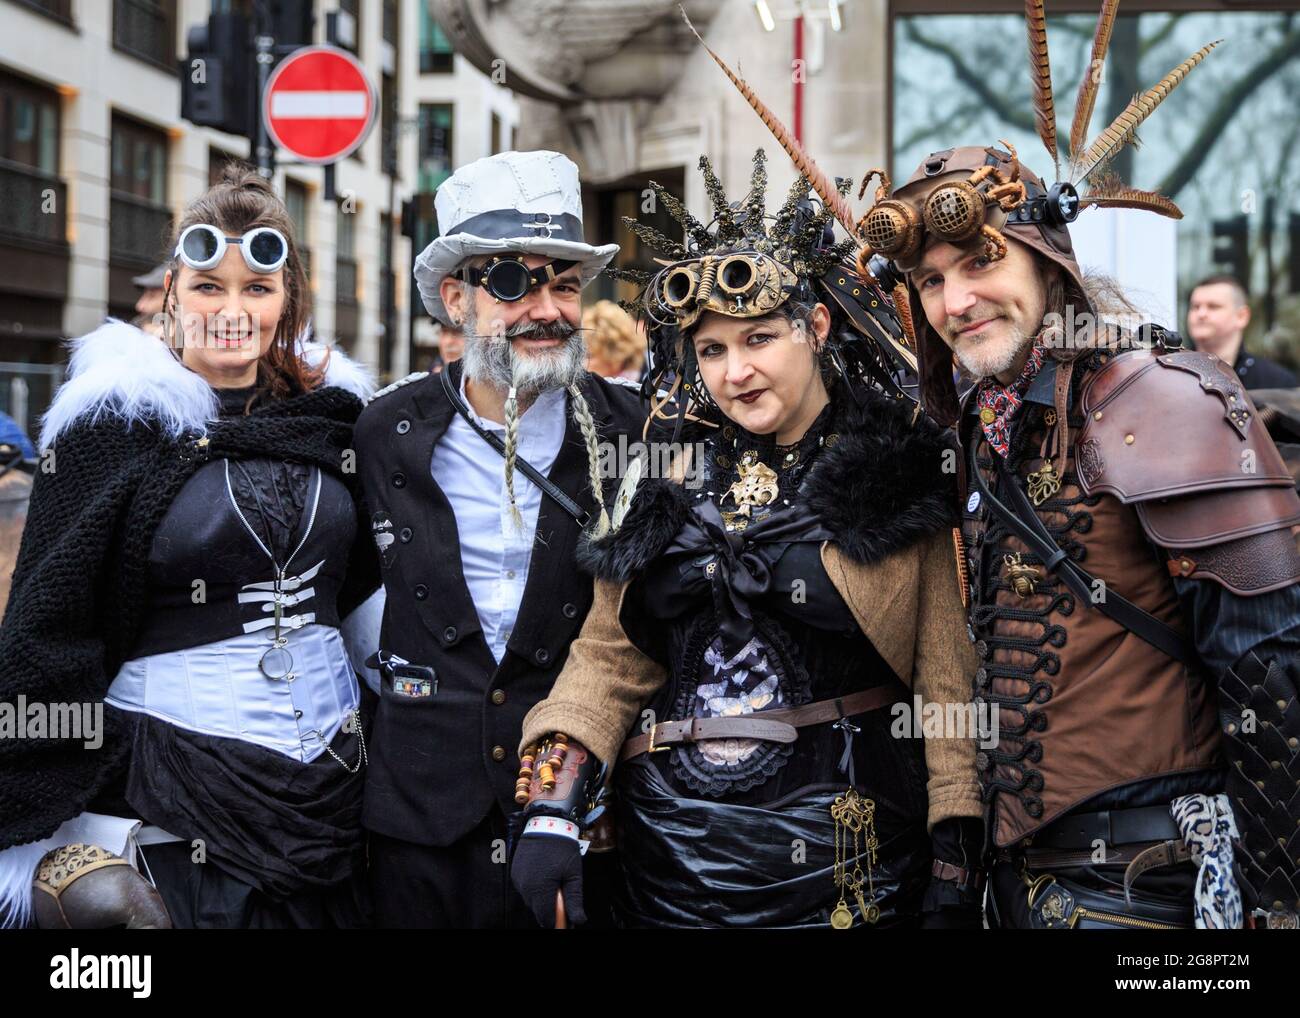 Participants in steam punk costume outfits at London New Year's Day Parade (LNYDP), England Stock Photo